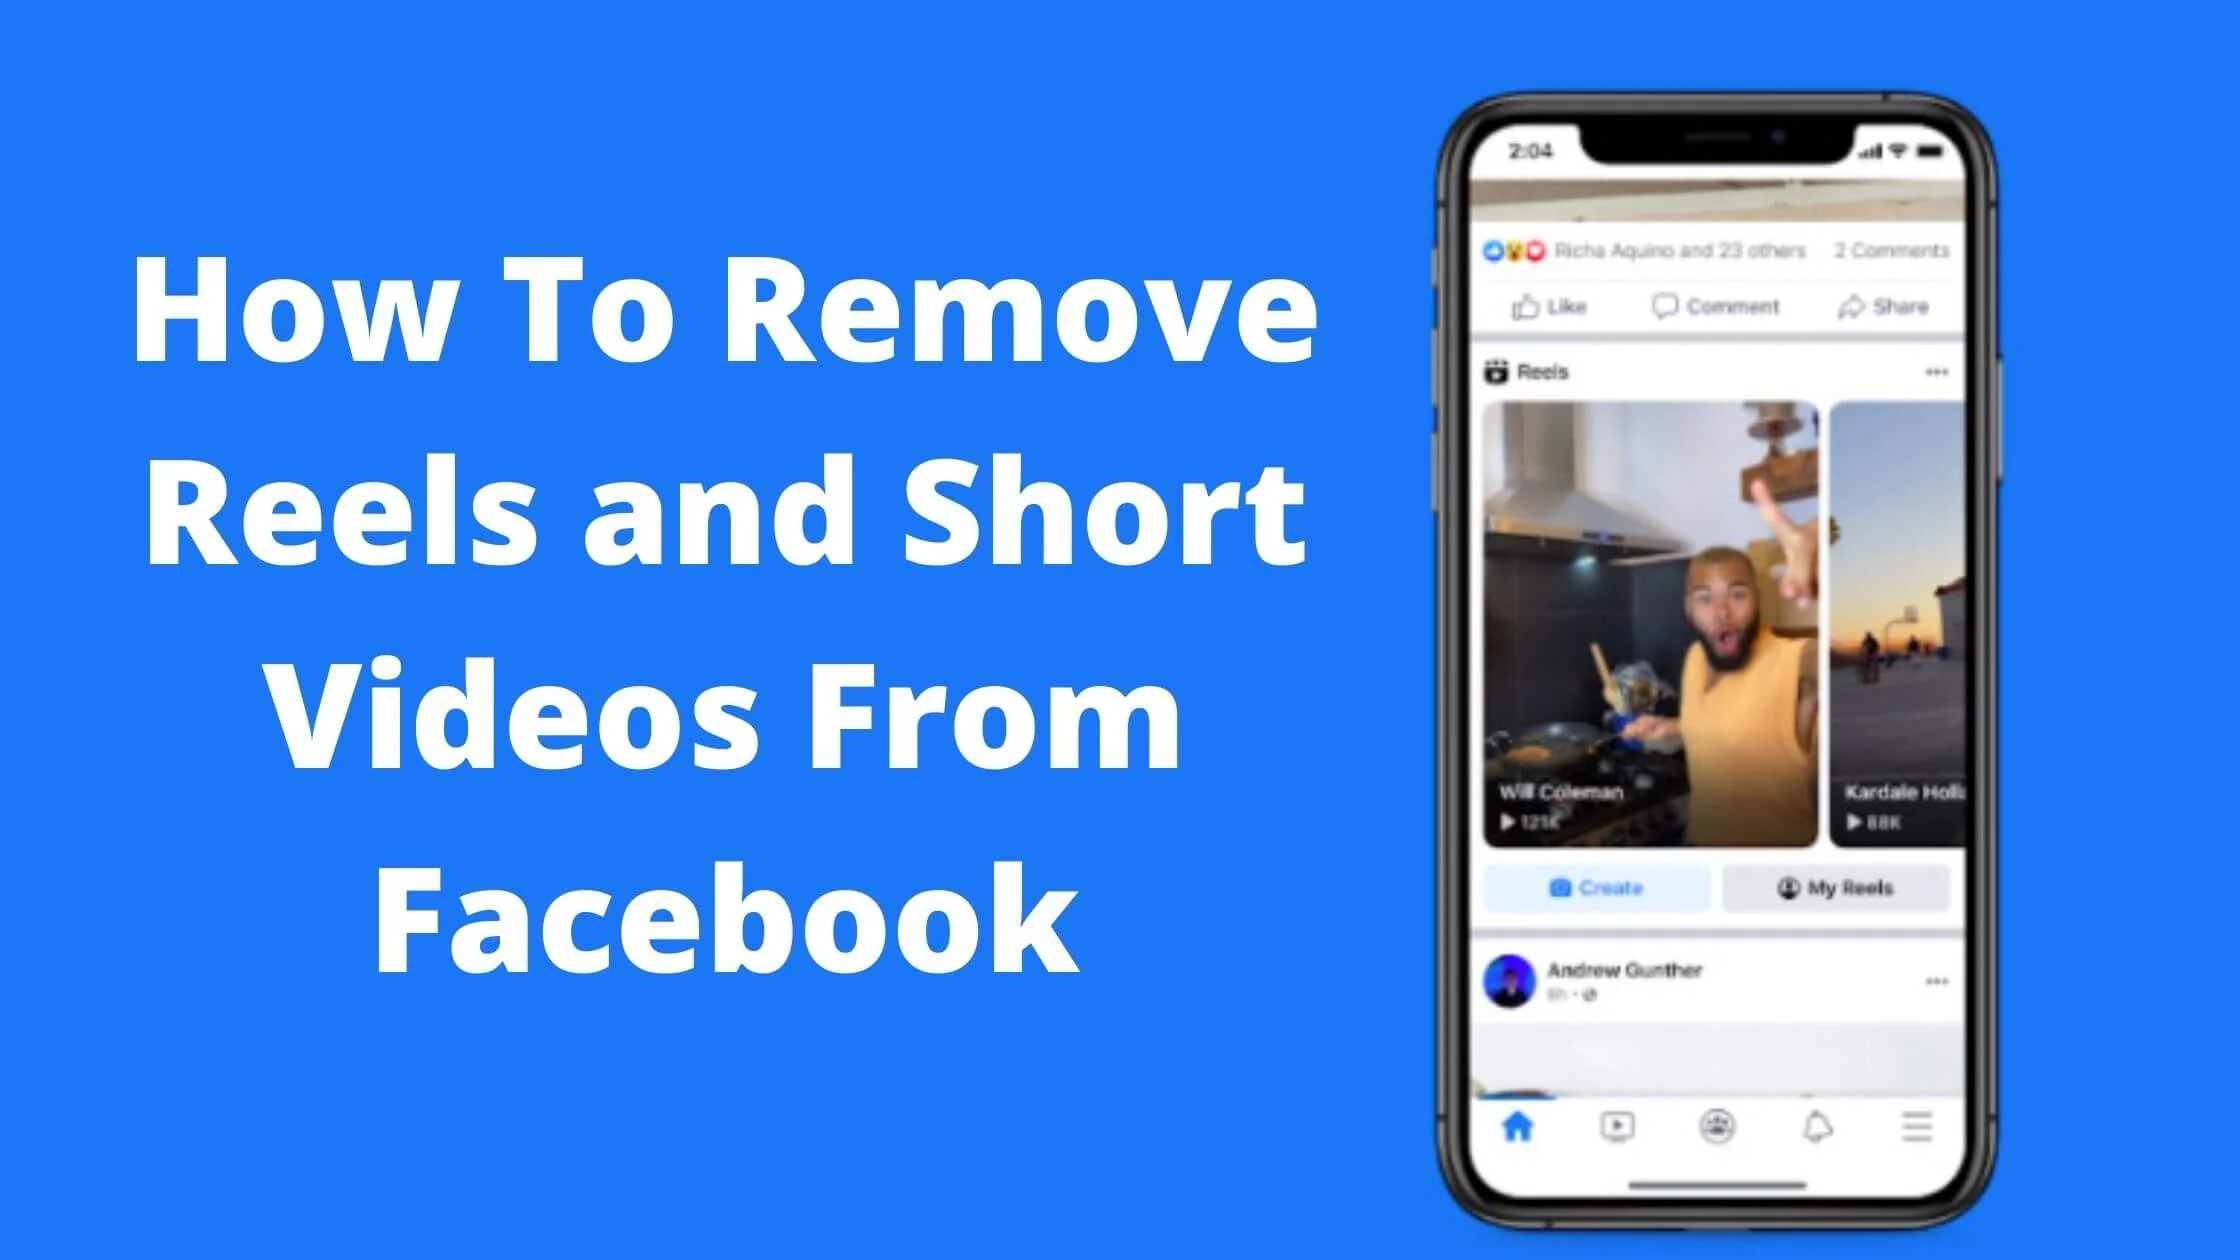 How To Remove Reels and Short Videos From Facebook